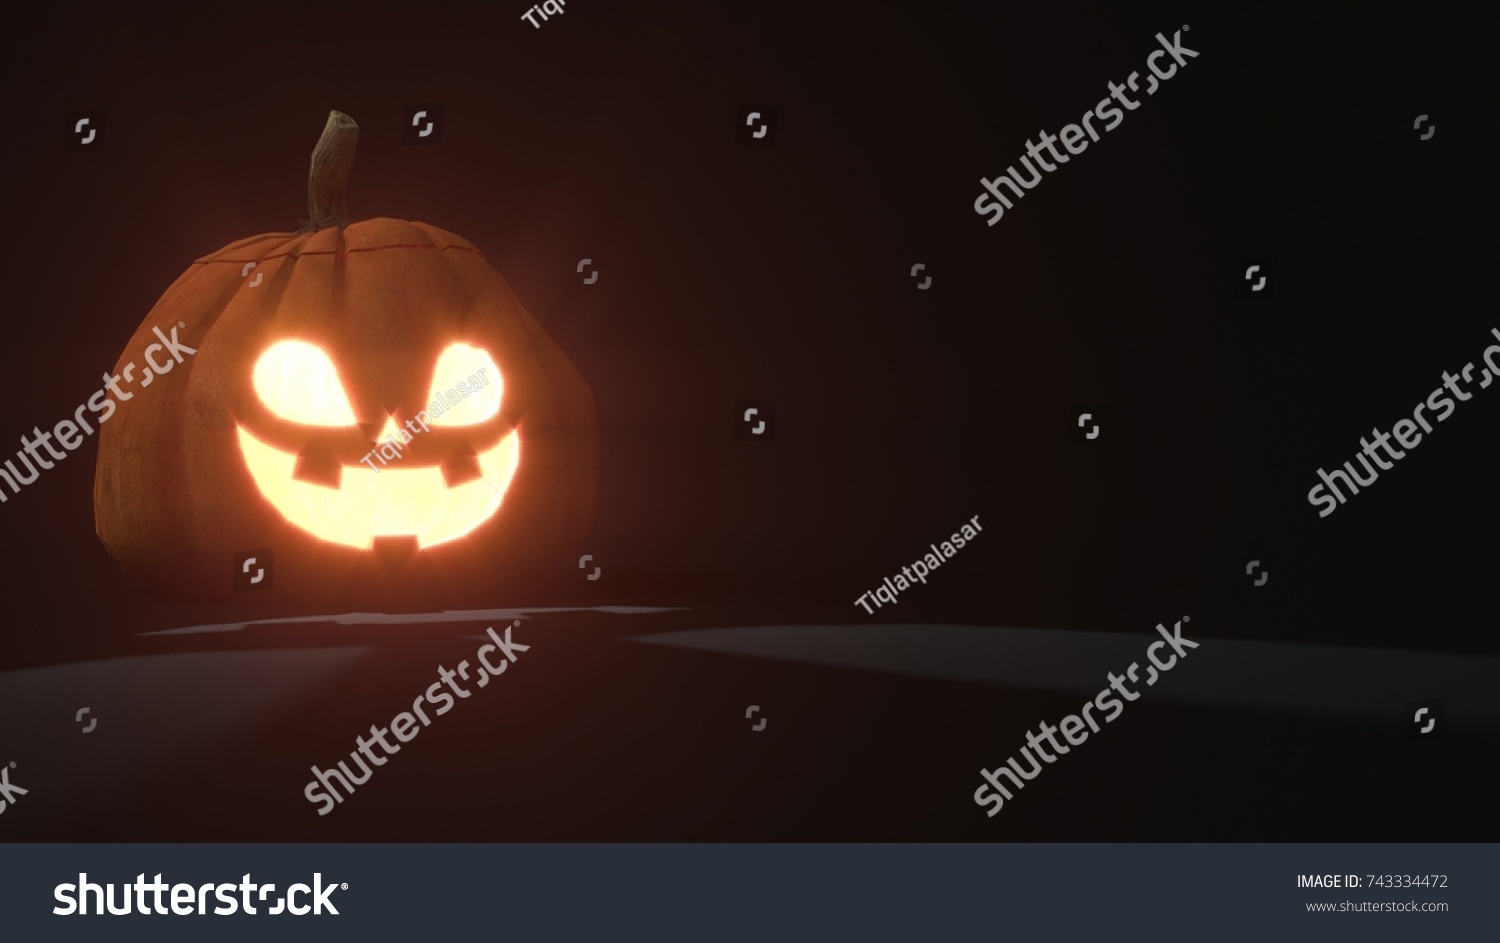 3d rendering of a smiling scary Jack o Lantern Halloween pumpkin on dark background. Light comes out of its mouth and eyes. 3d illustration #743334472